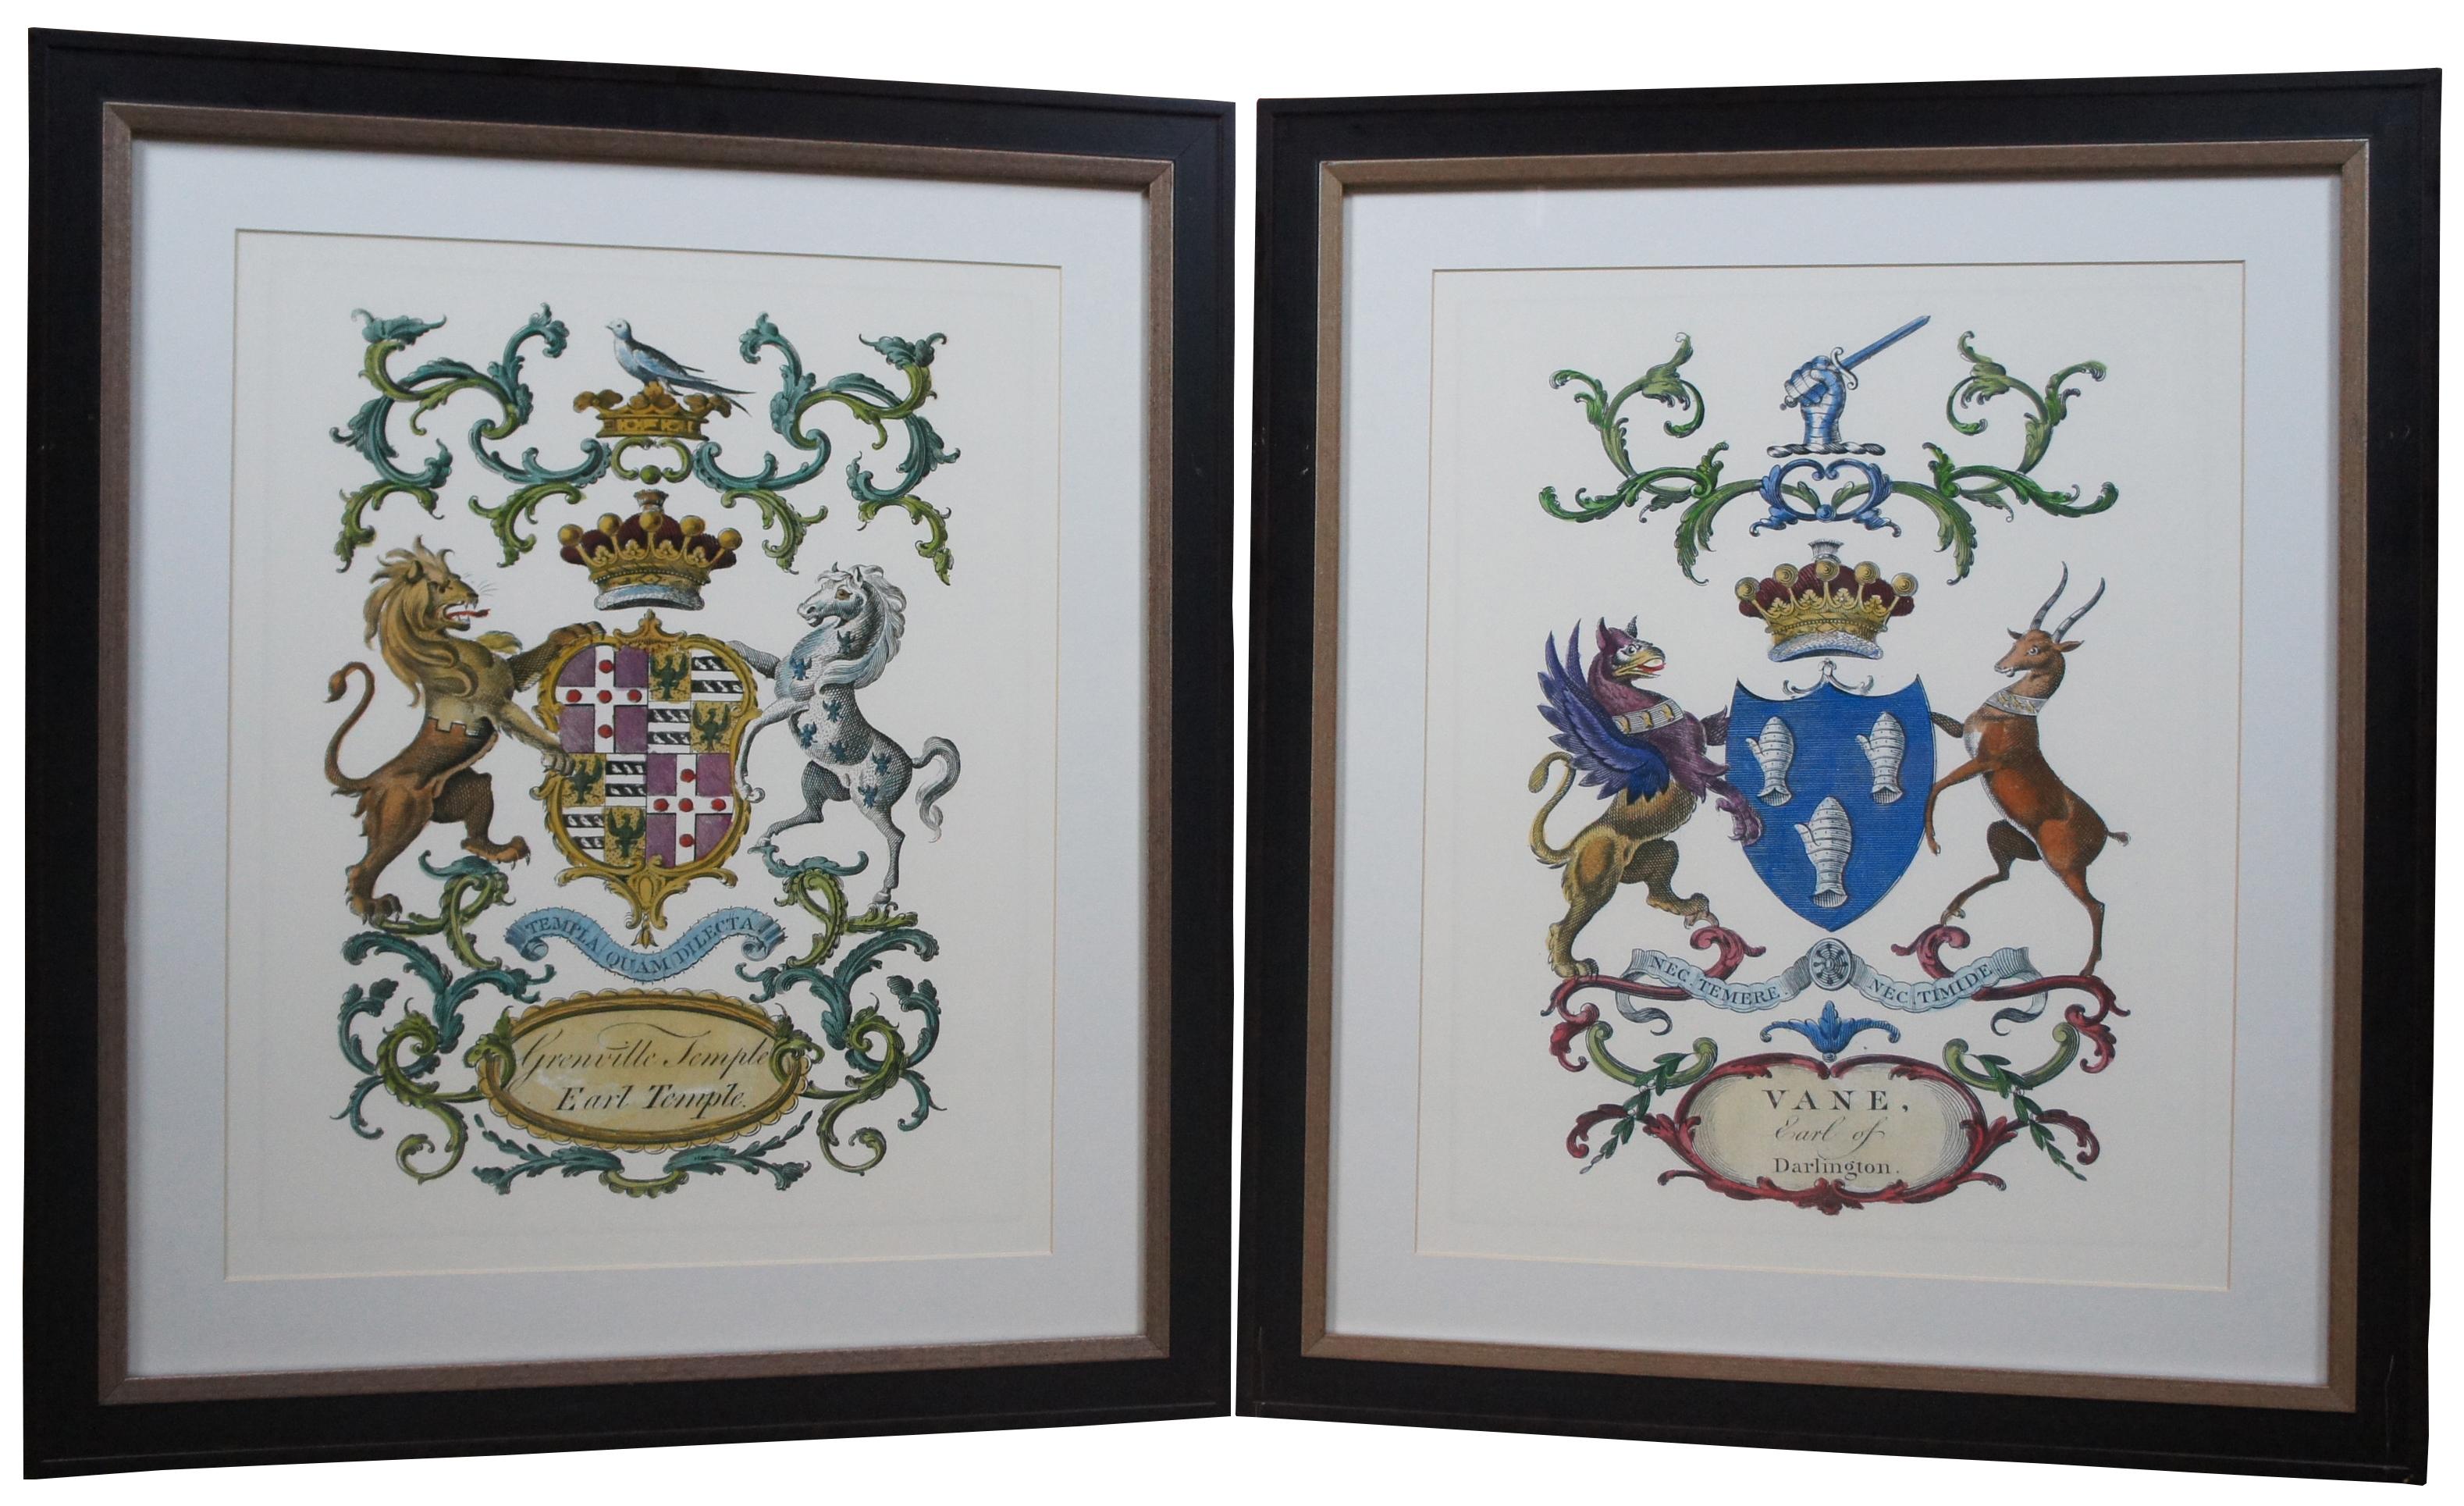 Set of three vintage heraldic prints showing the family coat of arms for Yelverton - Earl of Sussex, Vane – Earl of Darlington, and Grenville Temple – Earl Temple. Features griffons, lions, dragons, swords, bucks, horses, eagles and